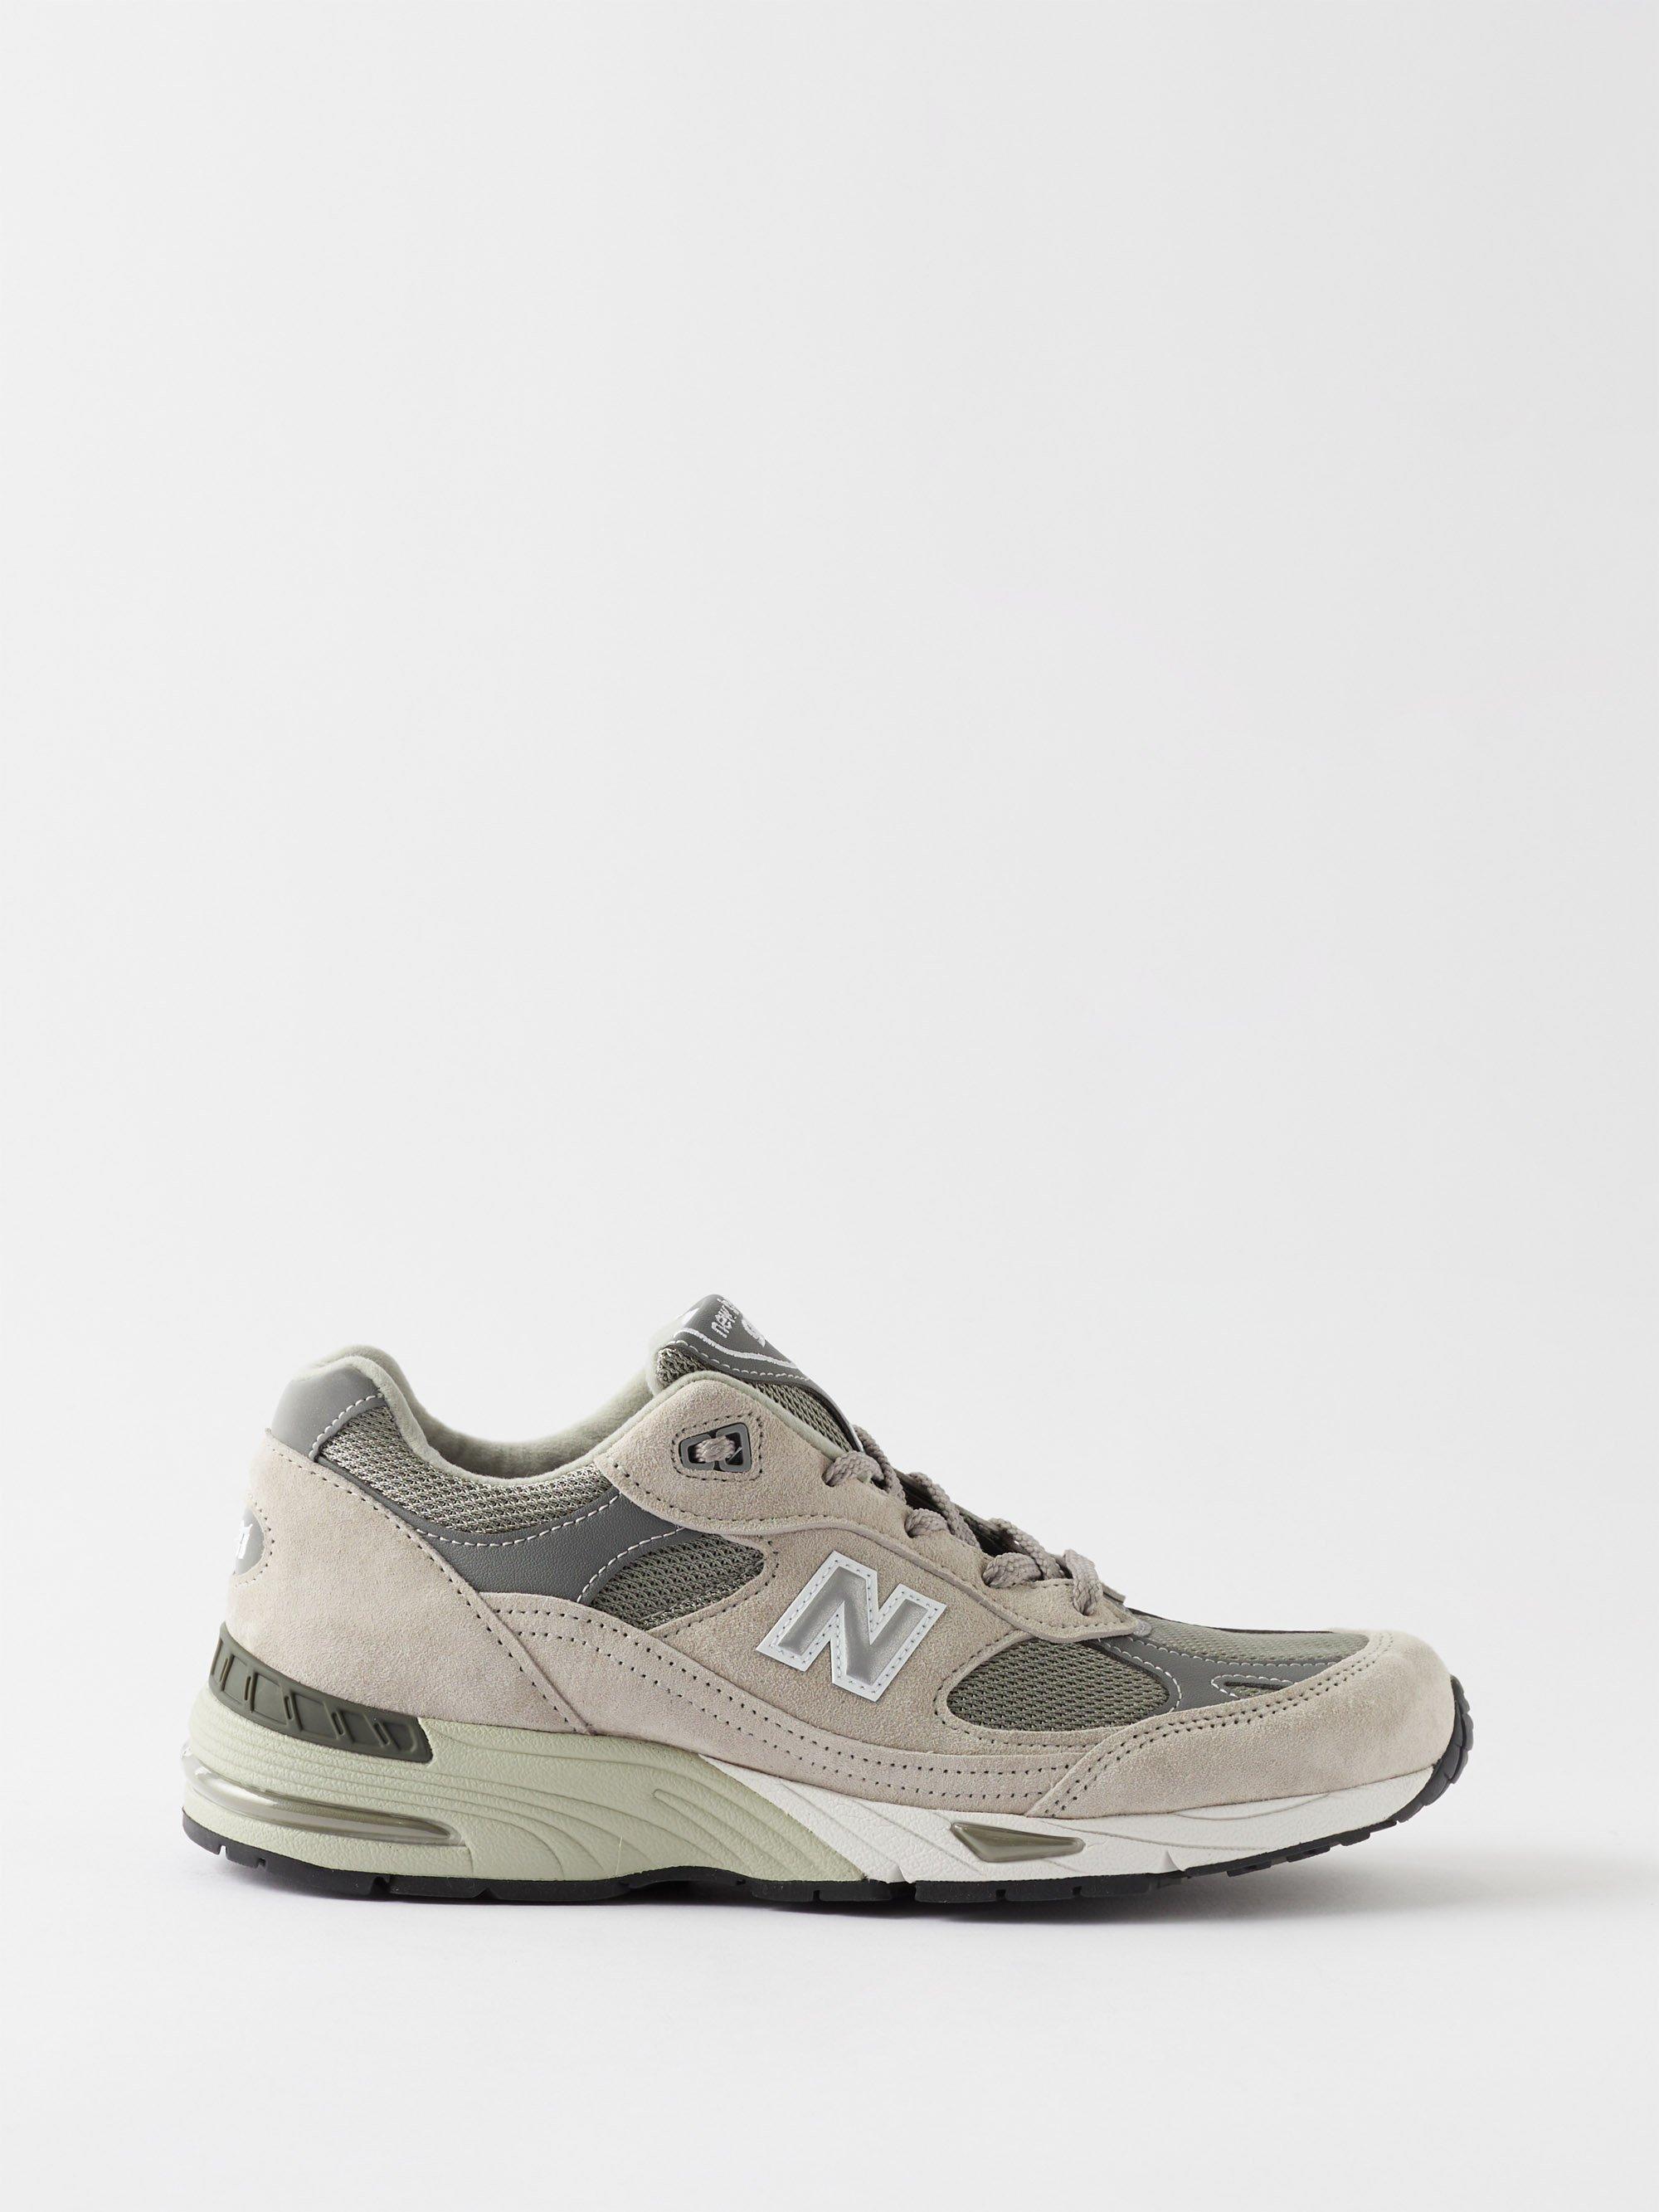 dormir pánico Bienvenido New Balance Made In Uk 991 Suede And Mesh Trainers in White | Lyst